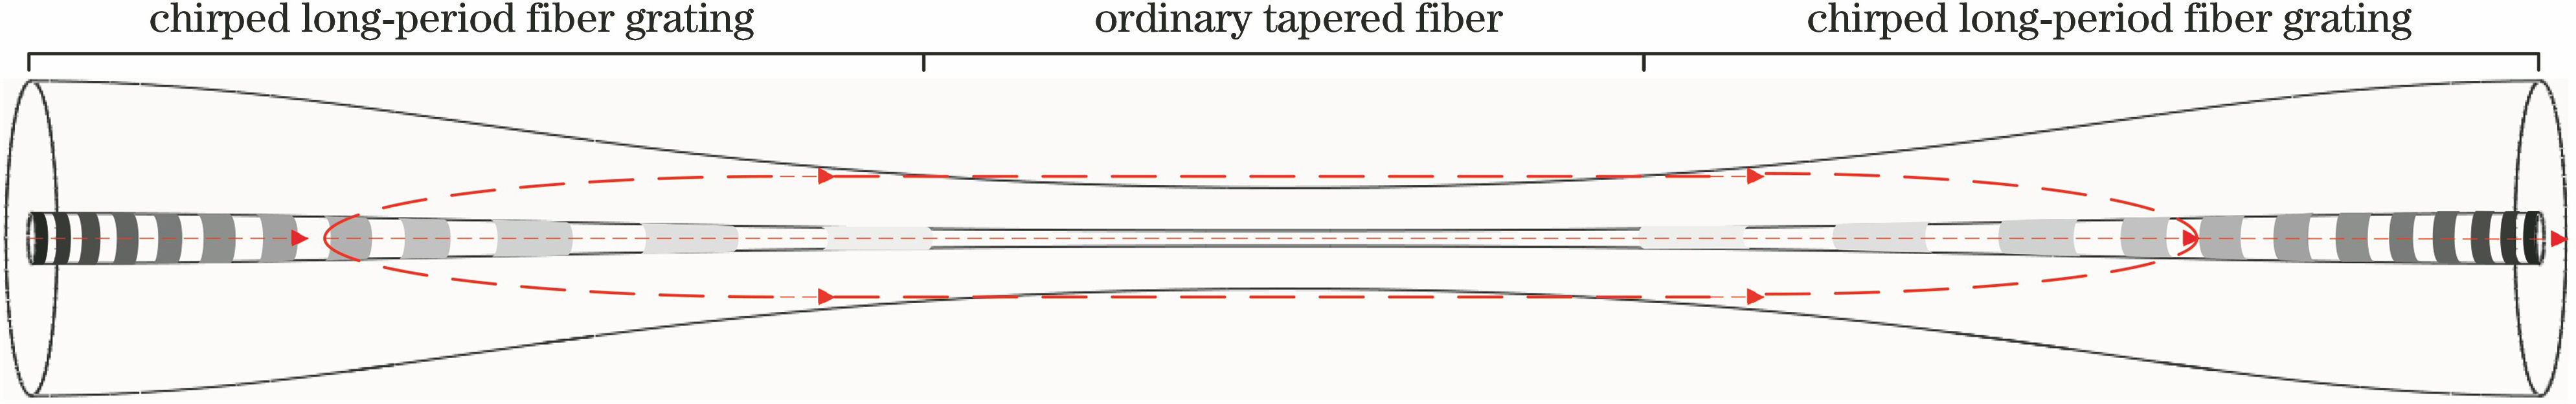 Structure of tapered grating